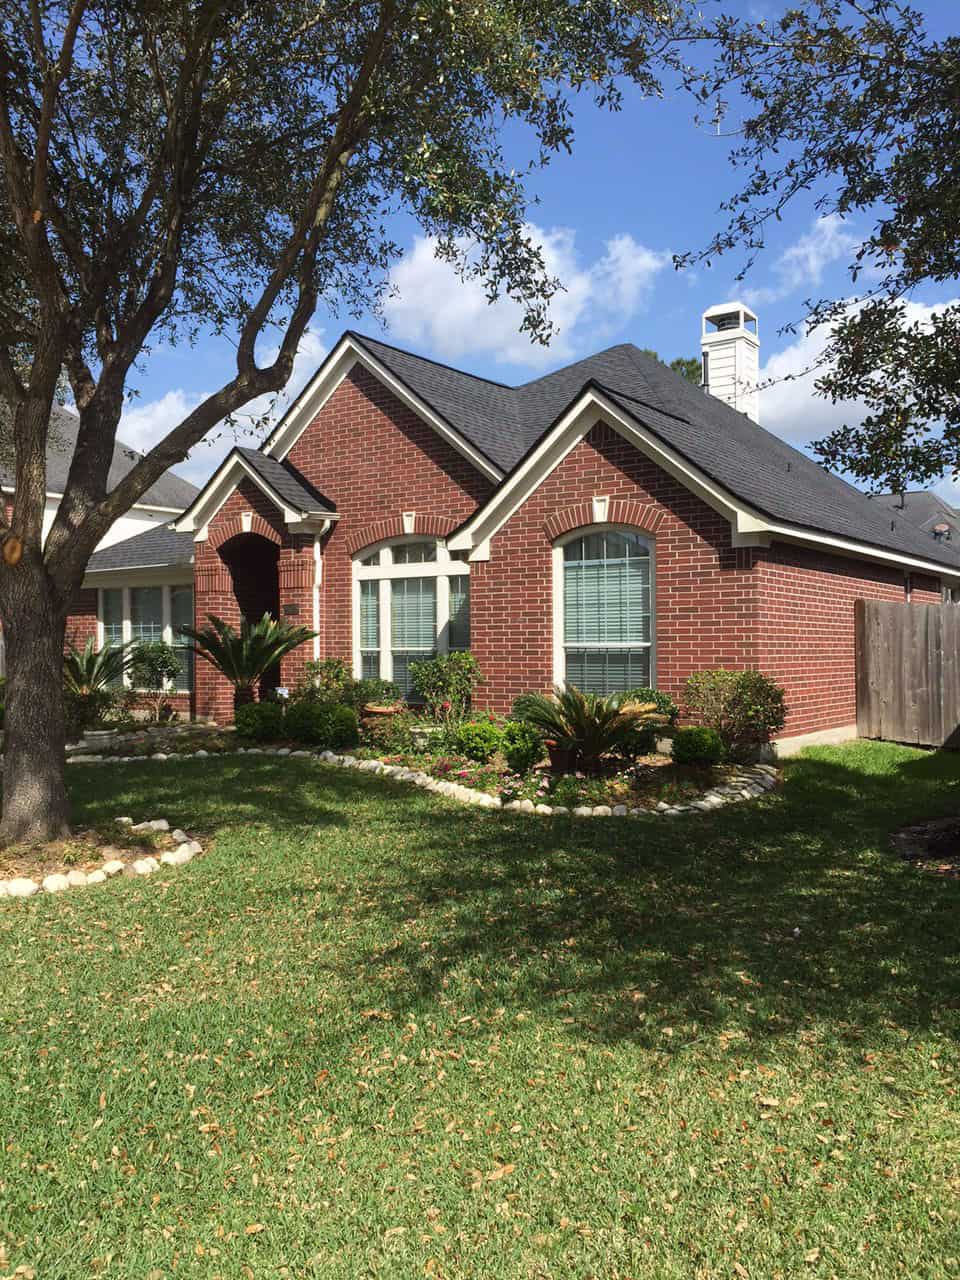 Residential roofing in Cypress Texas